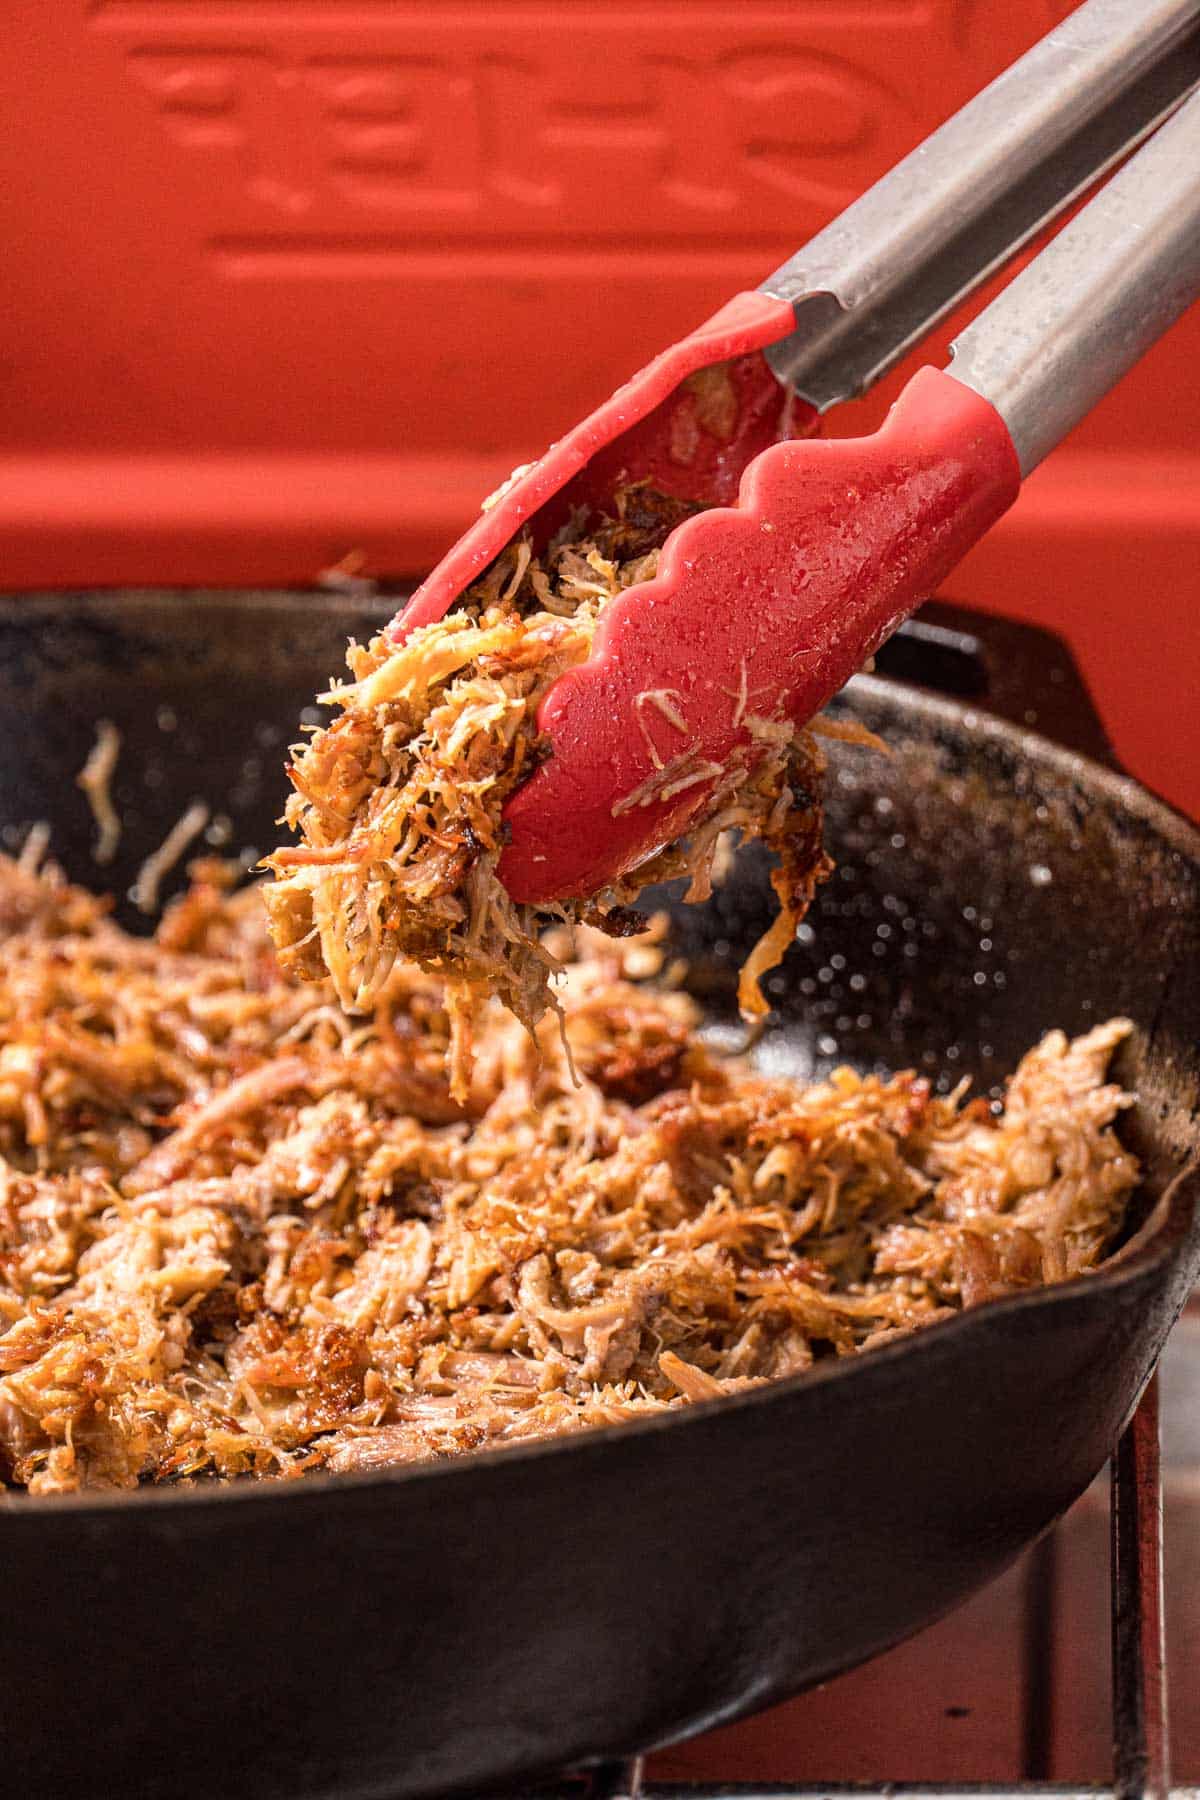 A pair of tongs lifting crispy carnitas out of a cast iron skillet.